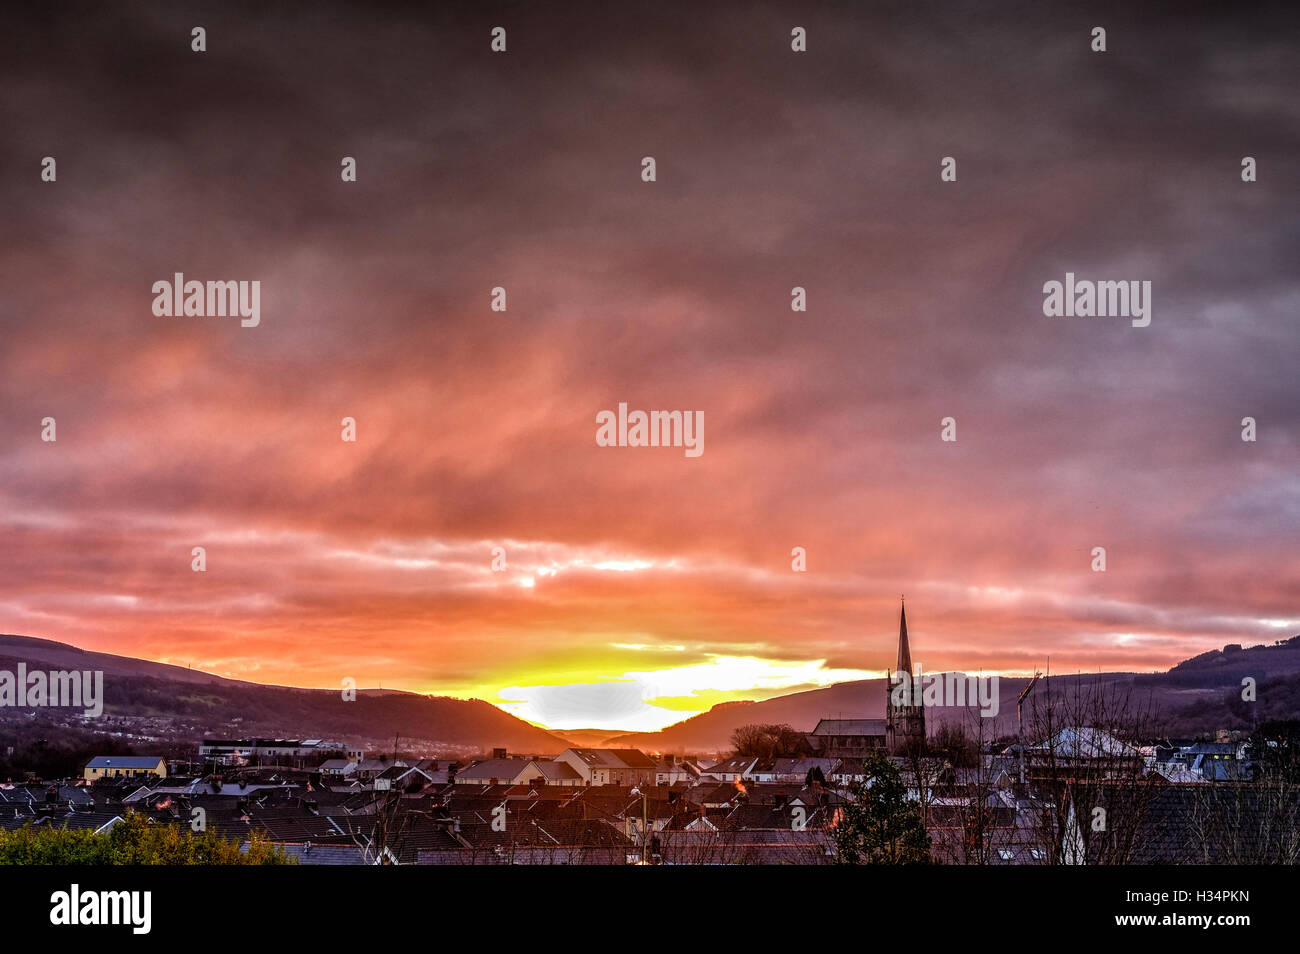 Dawn view across Aberdare in the South Wales Valleys Stock Photo